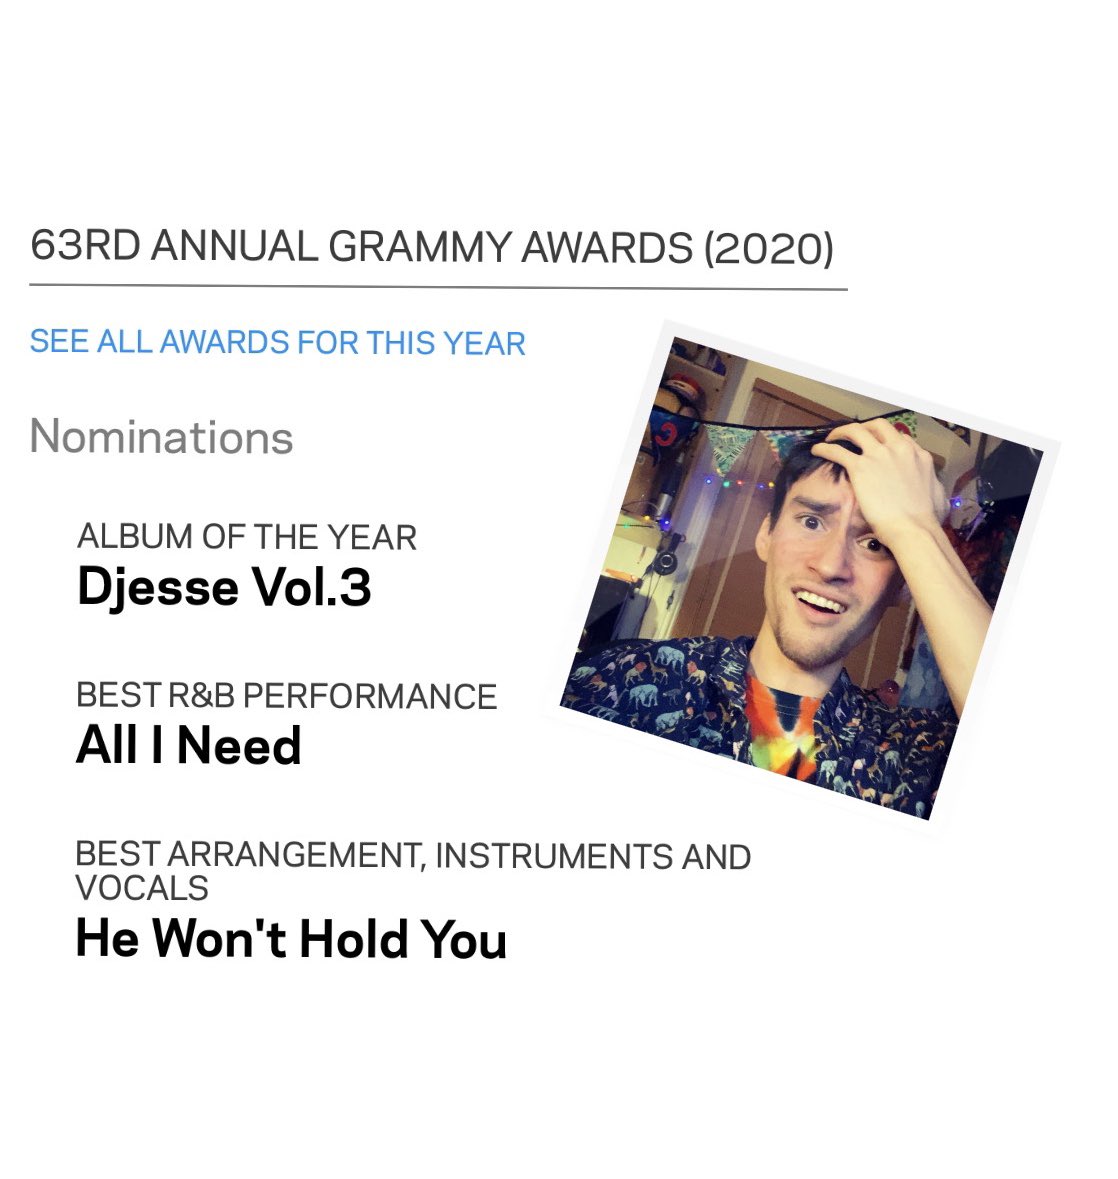 Three Grammy nominations including ALBUM OF THE YEAR????????!!!!!!!!!!!!!!!!!!!!!!!!!!!!!